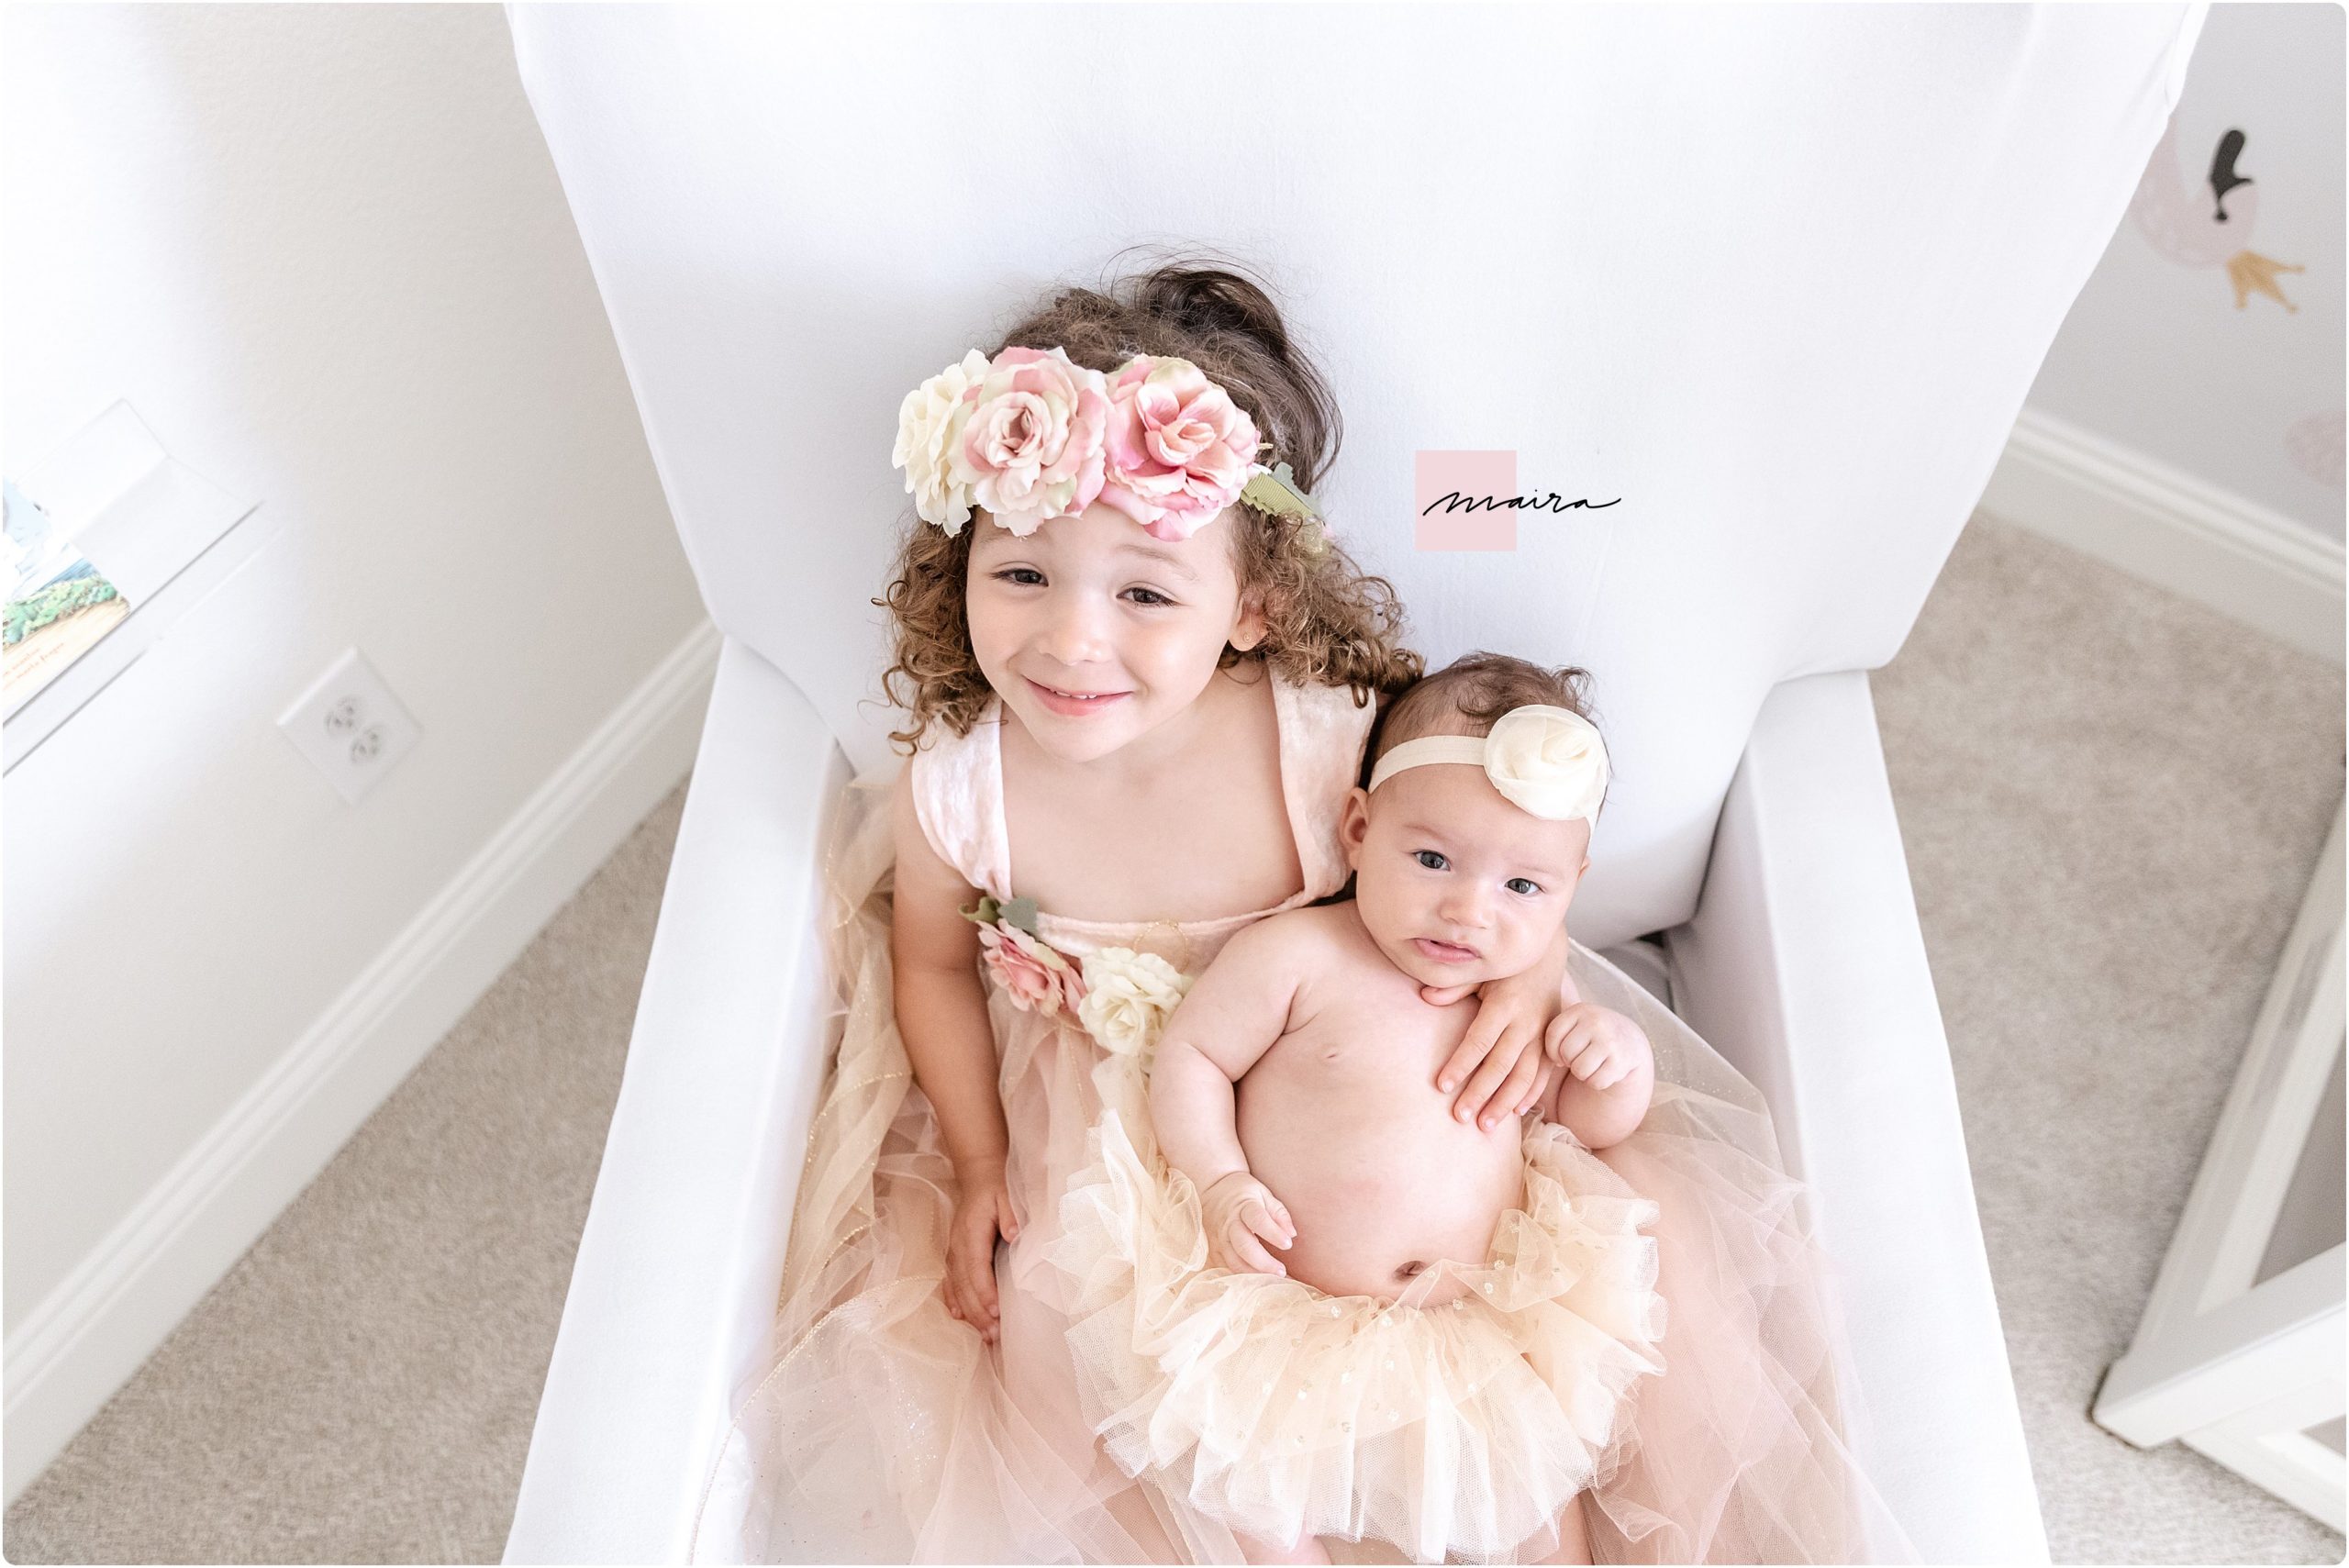 Lifestyle Family Newborn Session, Texas, Travel photography, baby photos, Home session, Mom and baby, Dad and baby, Big sister and little sister photos, nursery photos, mom, dad, family